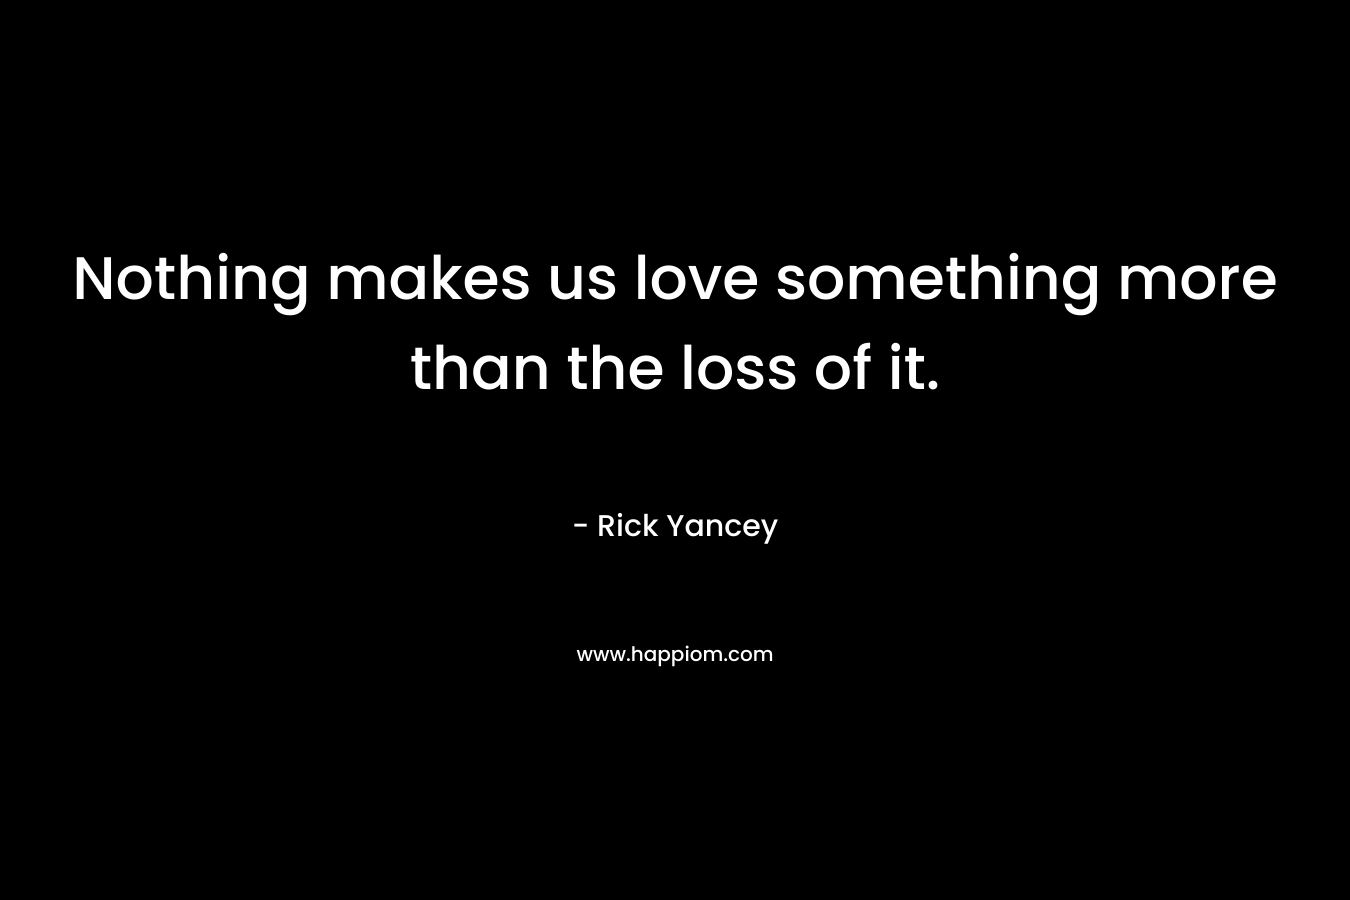 Nothing makes us love something more than the loss of it.